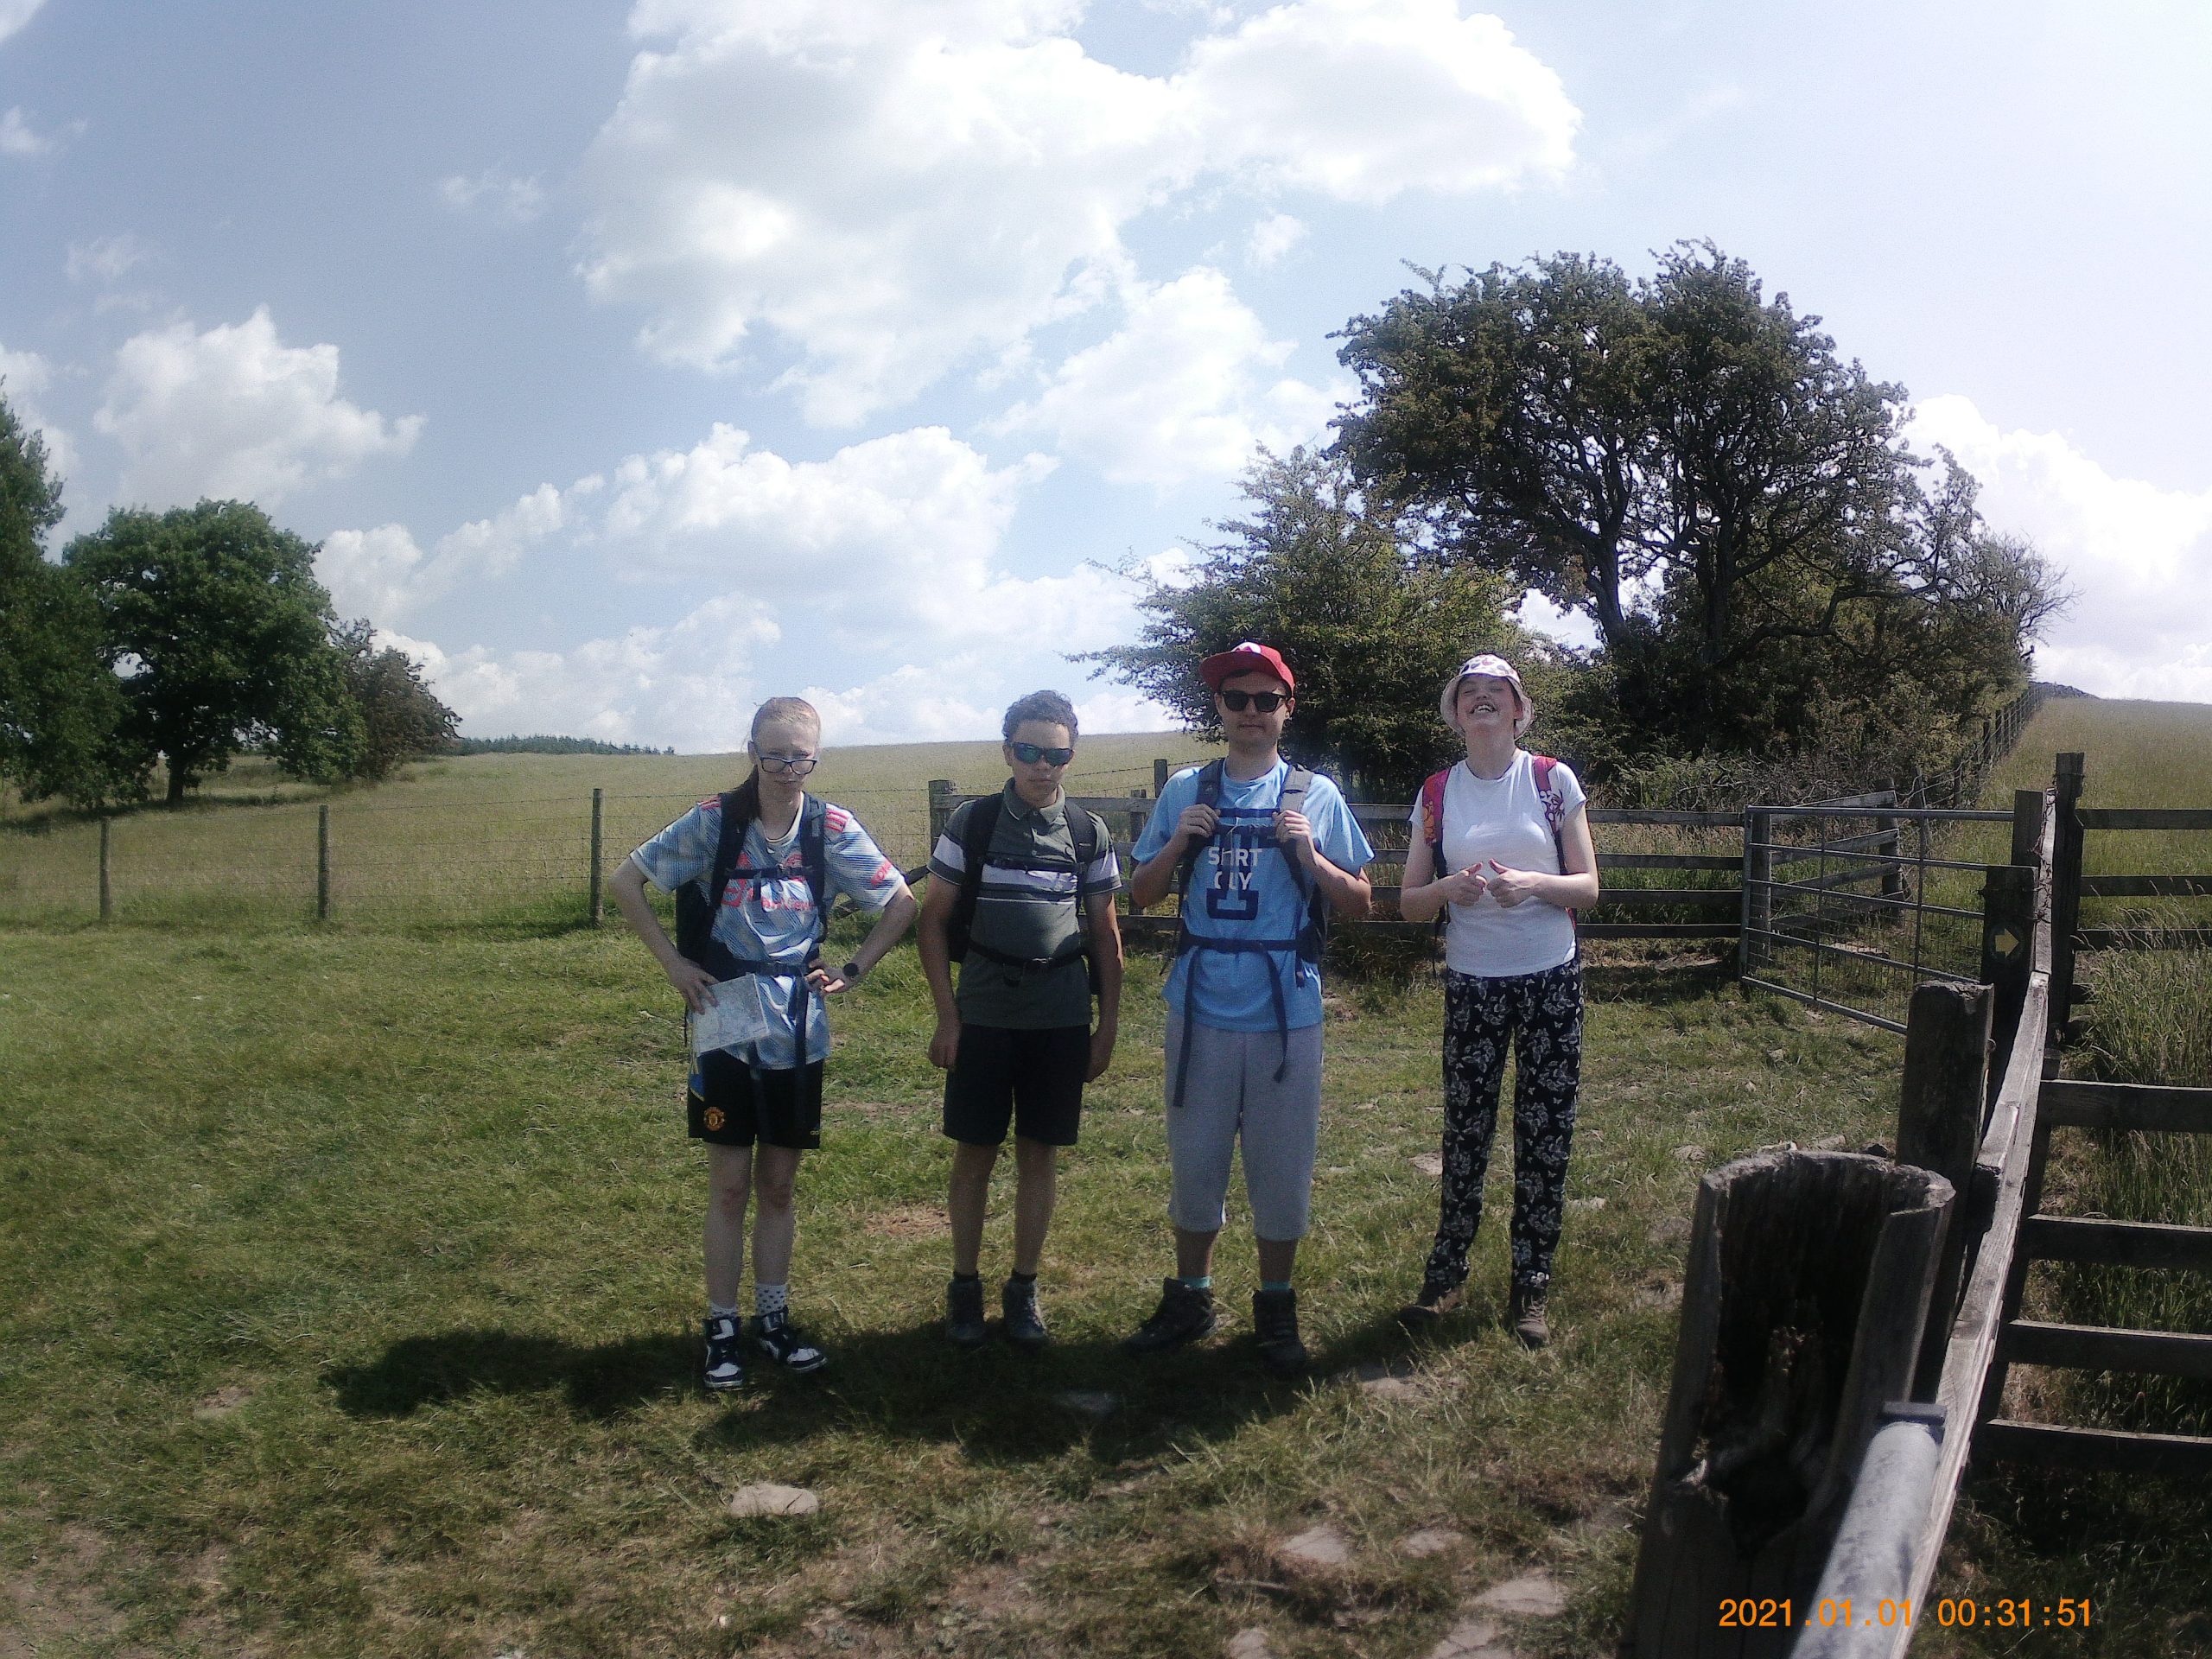 Four students pose for a photo during their sponsored walk